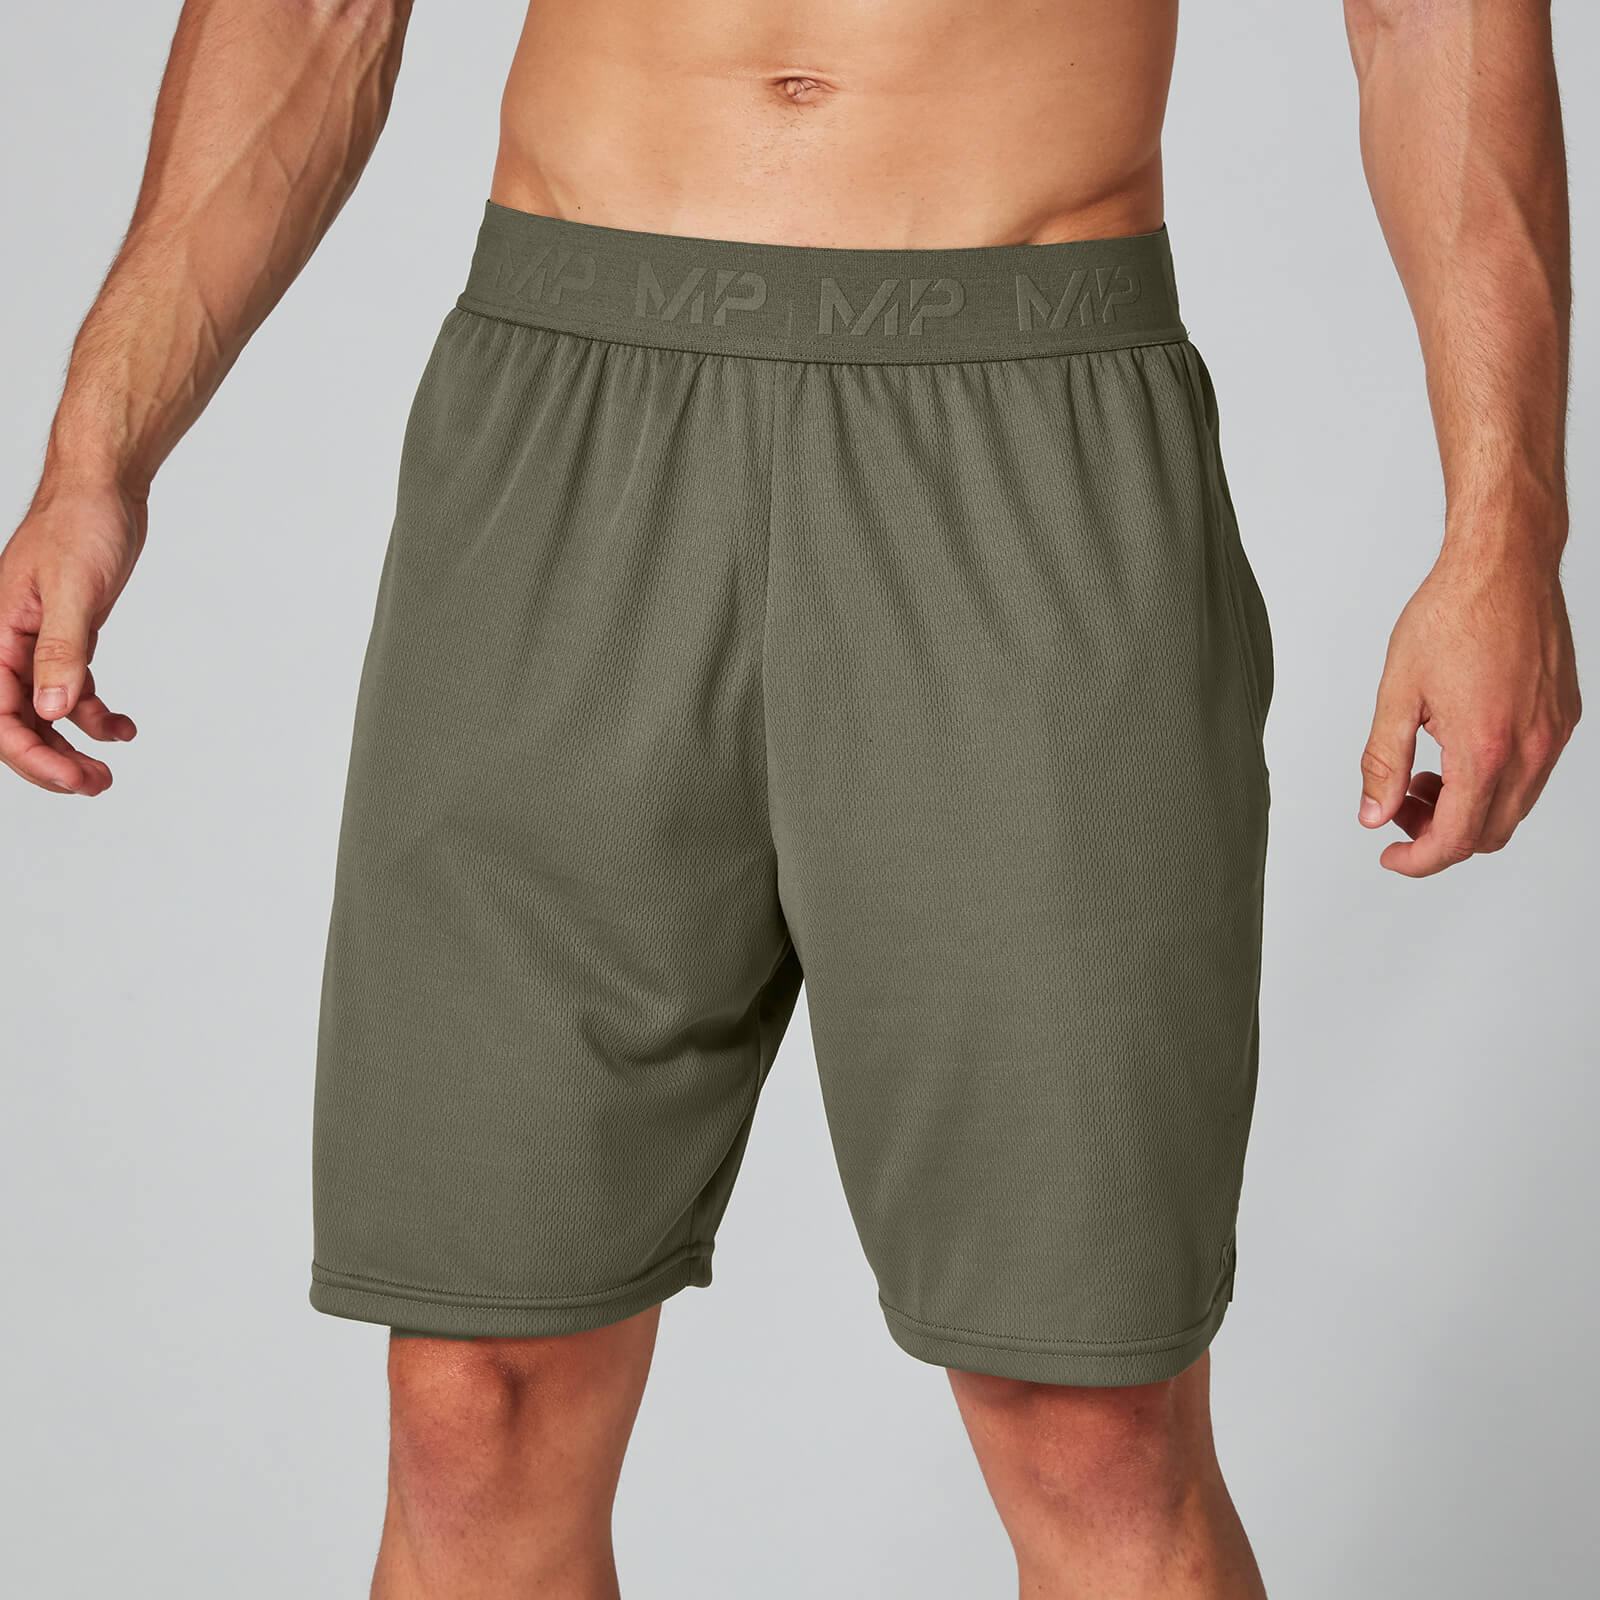 Dry-Tech Jersey Shorts - Forest Green